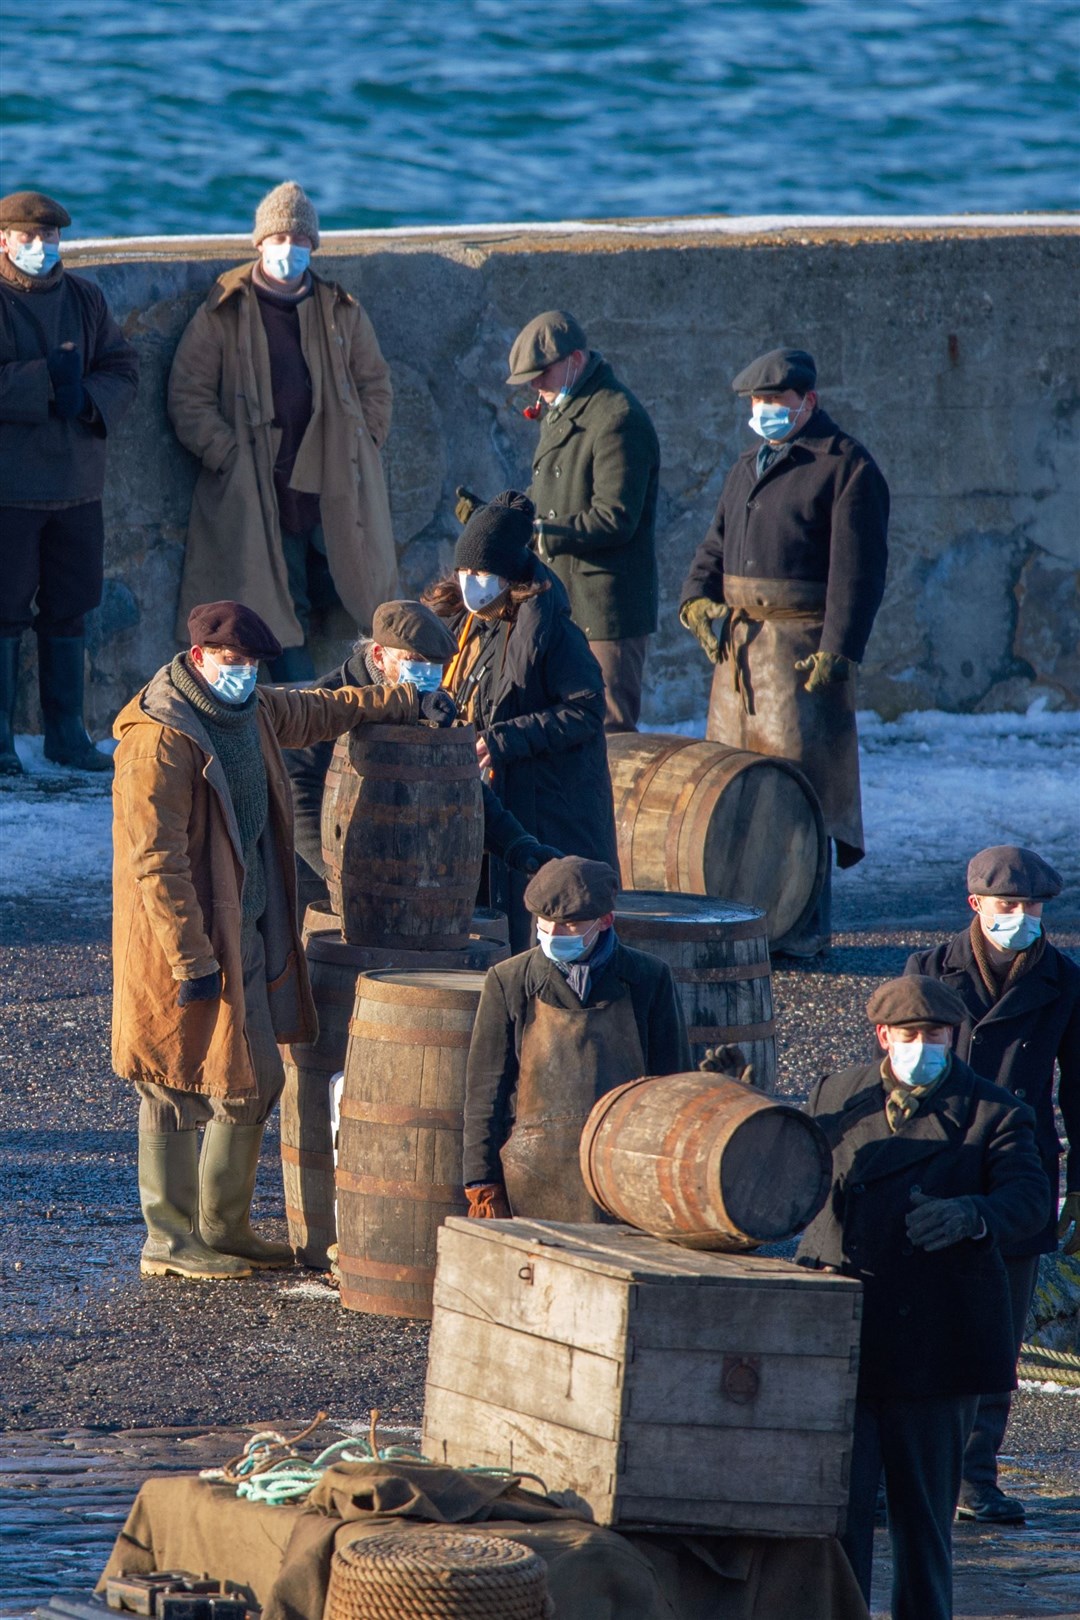 One of Daniel's photos of Peaky Blinders filming in Portsoy in February 2021.